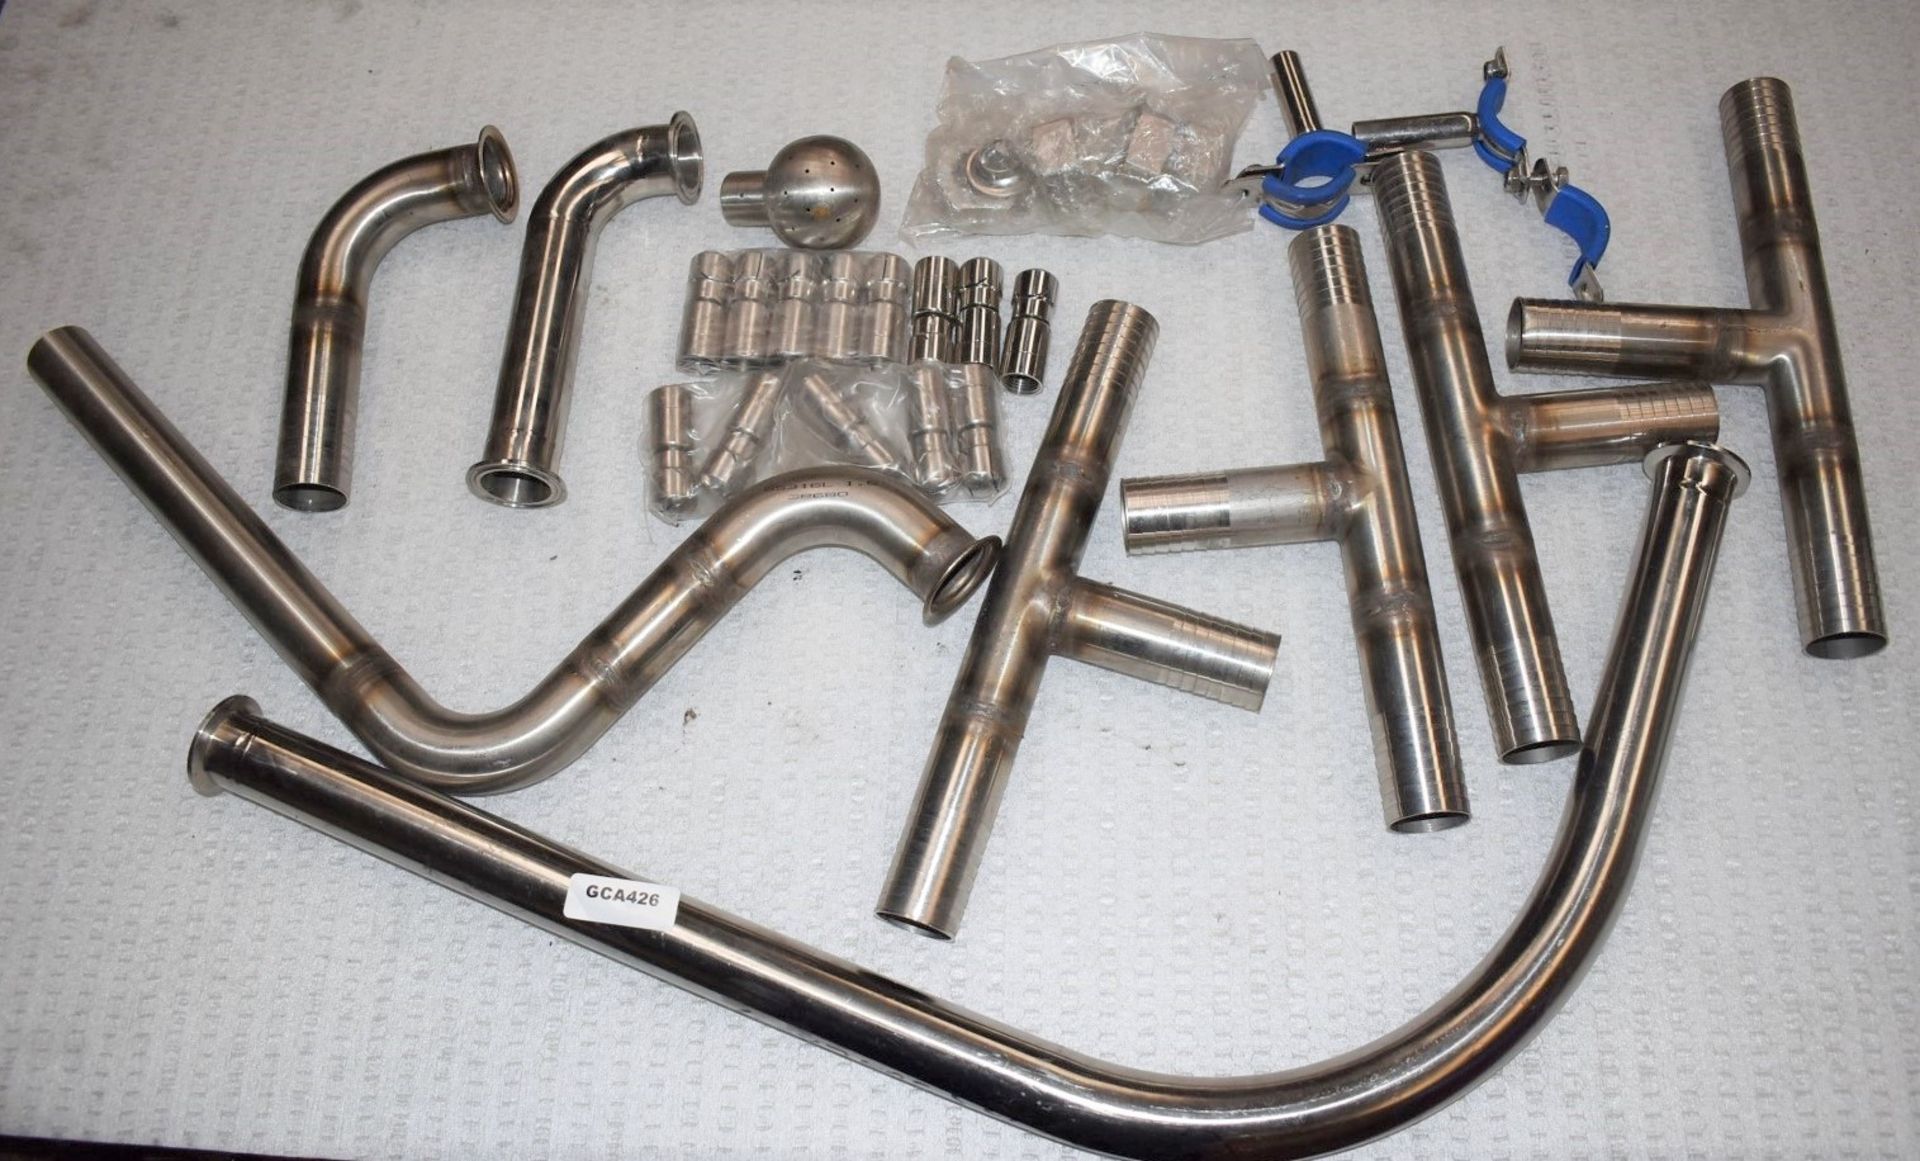 Assorted Job Lot of Stainless Steel Fittings For Brewery Equipment - Includes Approx 30 Pieces -